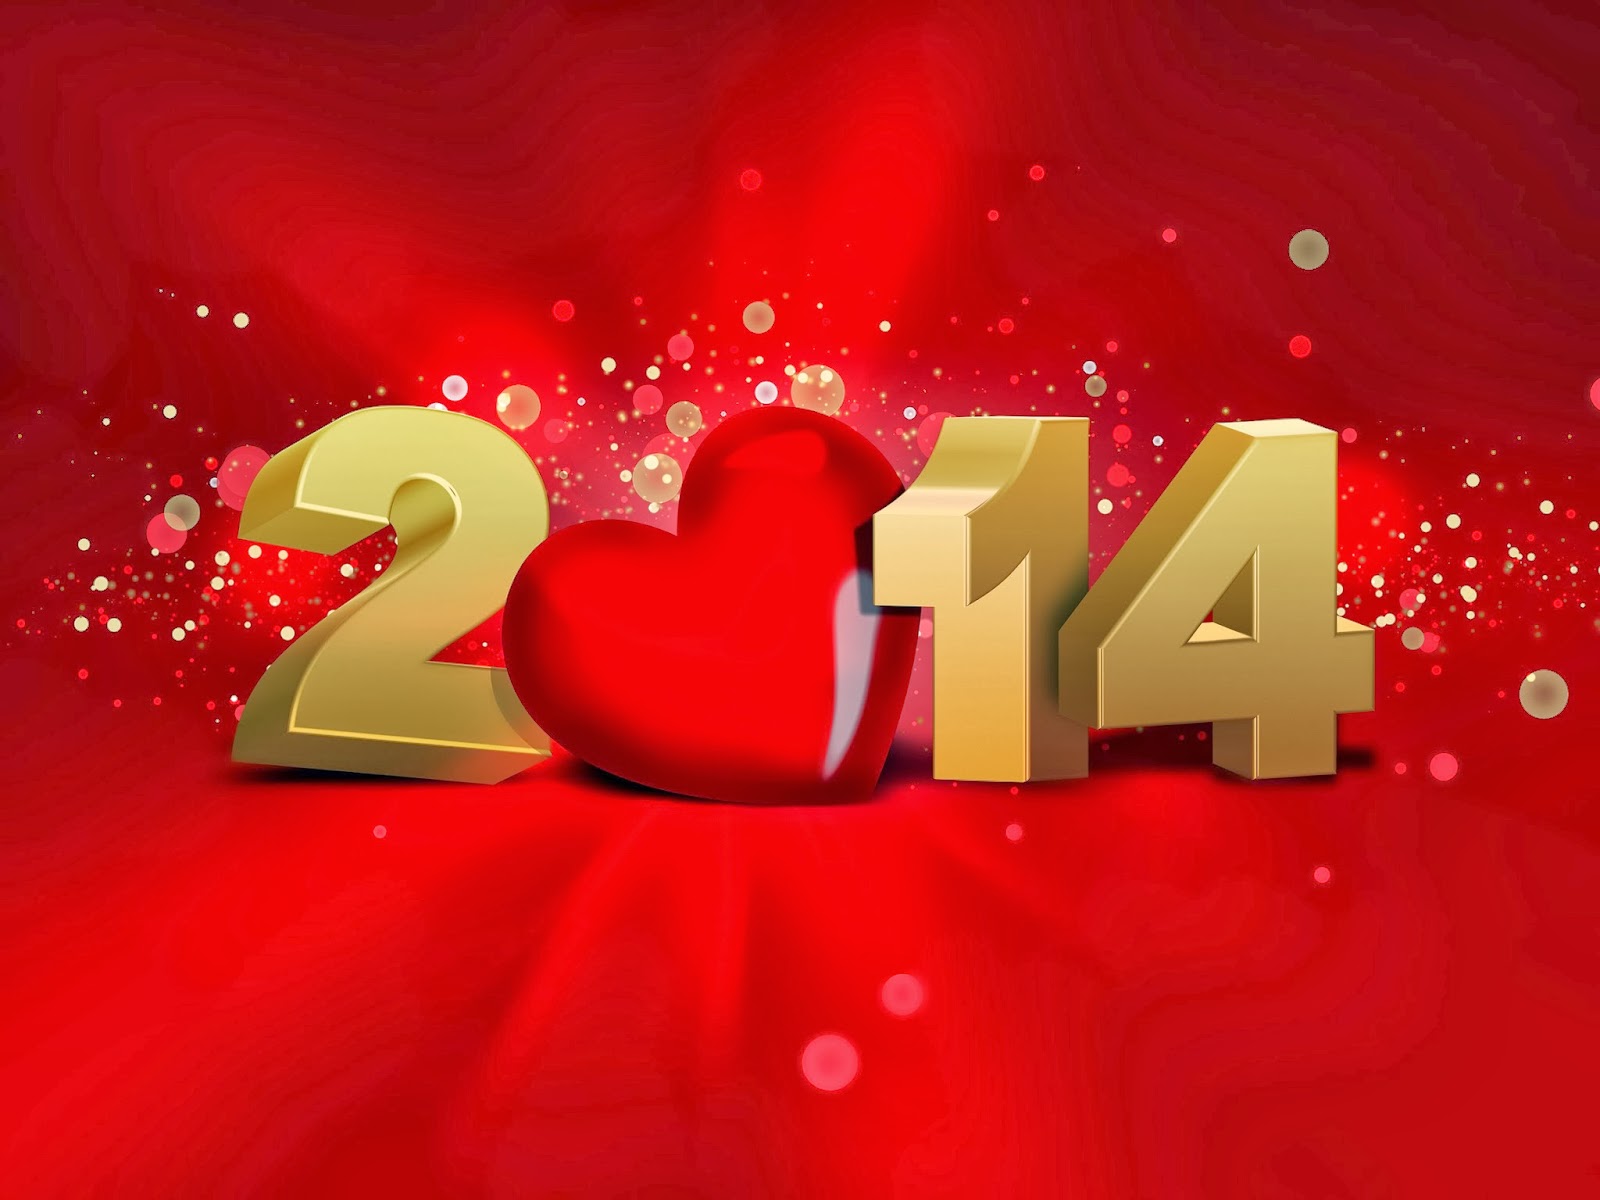 2014 Red Background Golden Text And Heart Jpg 2014 White